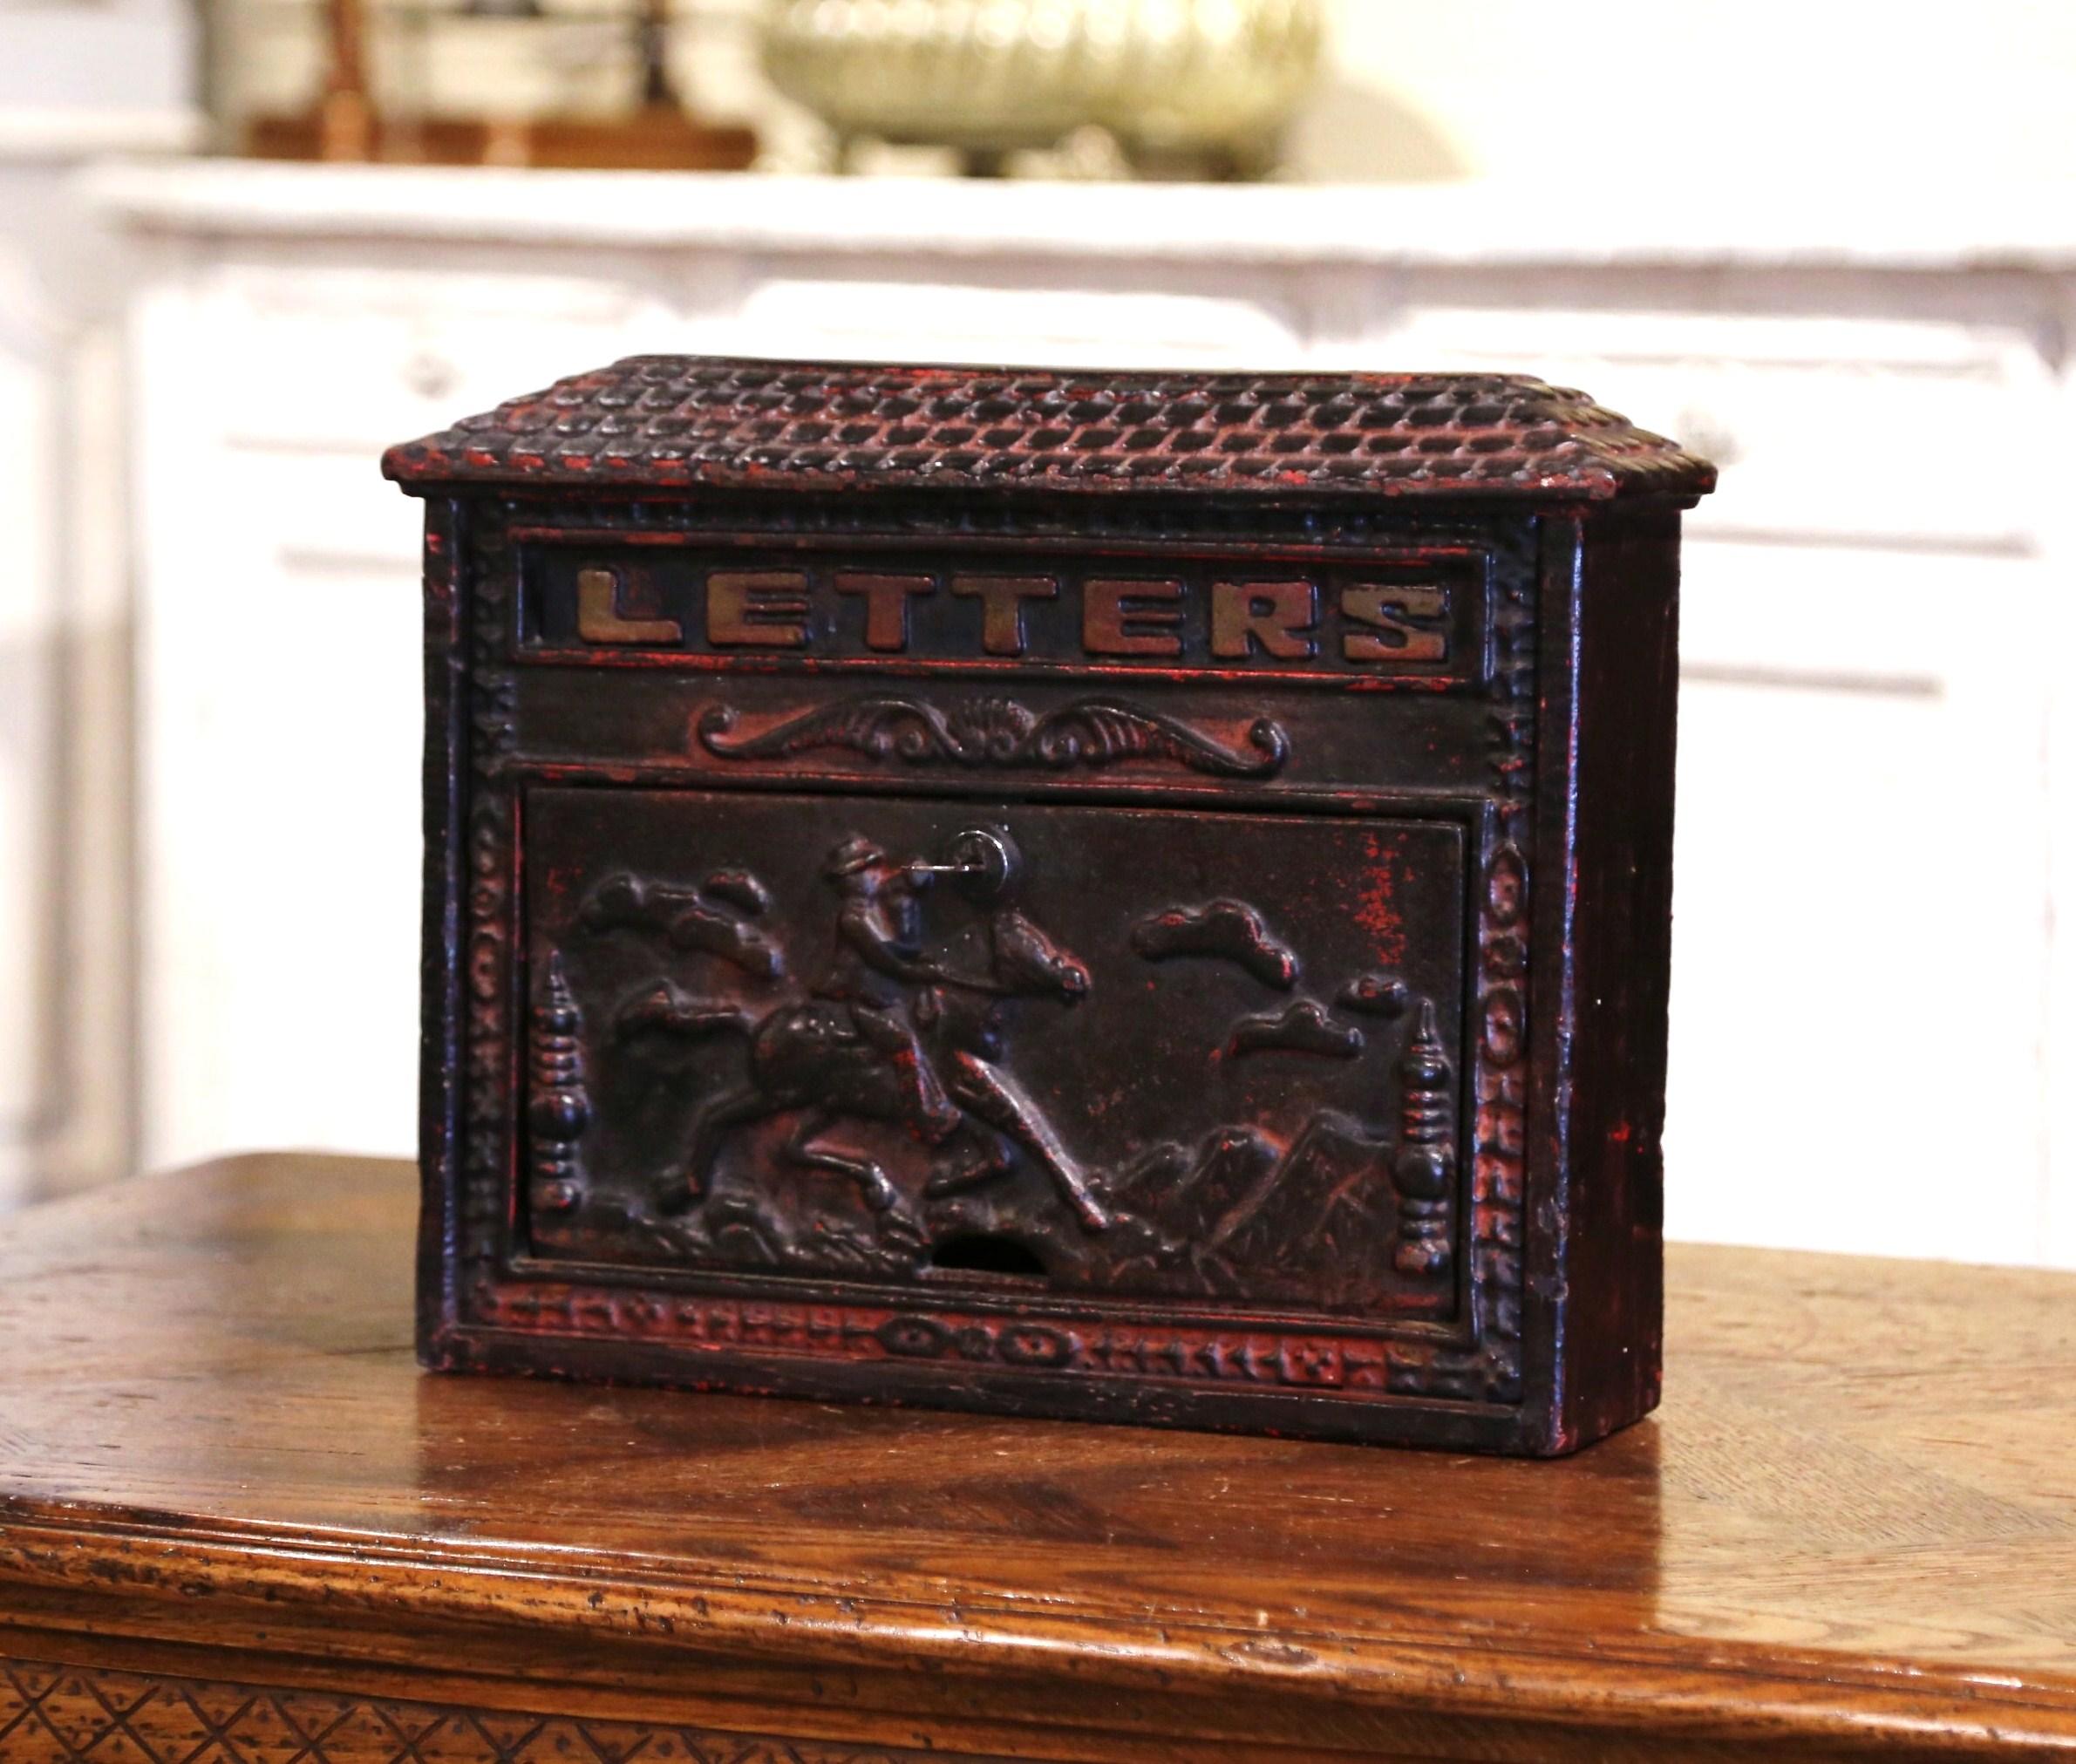 This antique iron mailbox was forged in England, circa 1880. The wall mail holder features high reliefs decorations on the front door including a pastoral scene and a horseman on his mount. The front has a envelope slot with word 